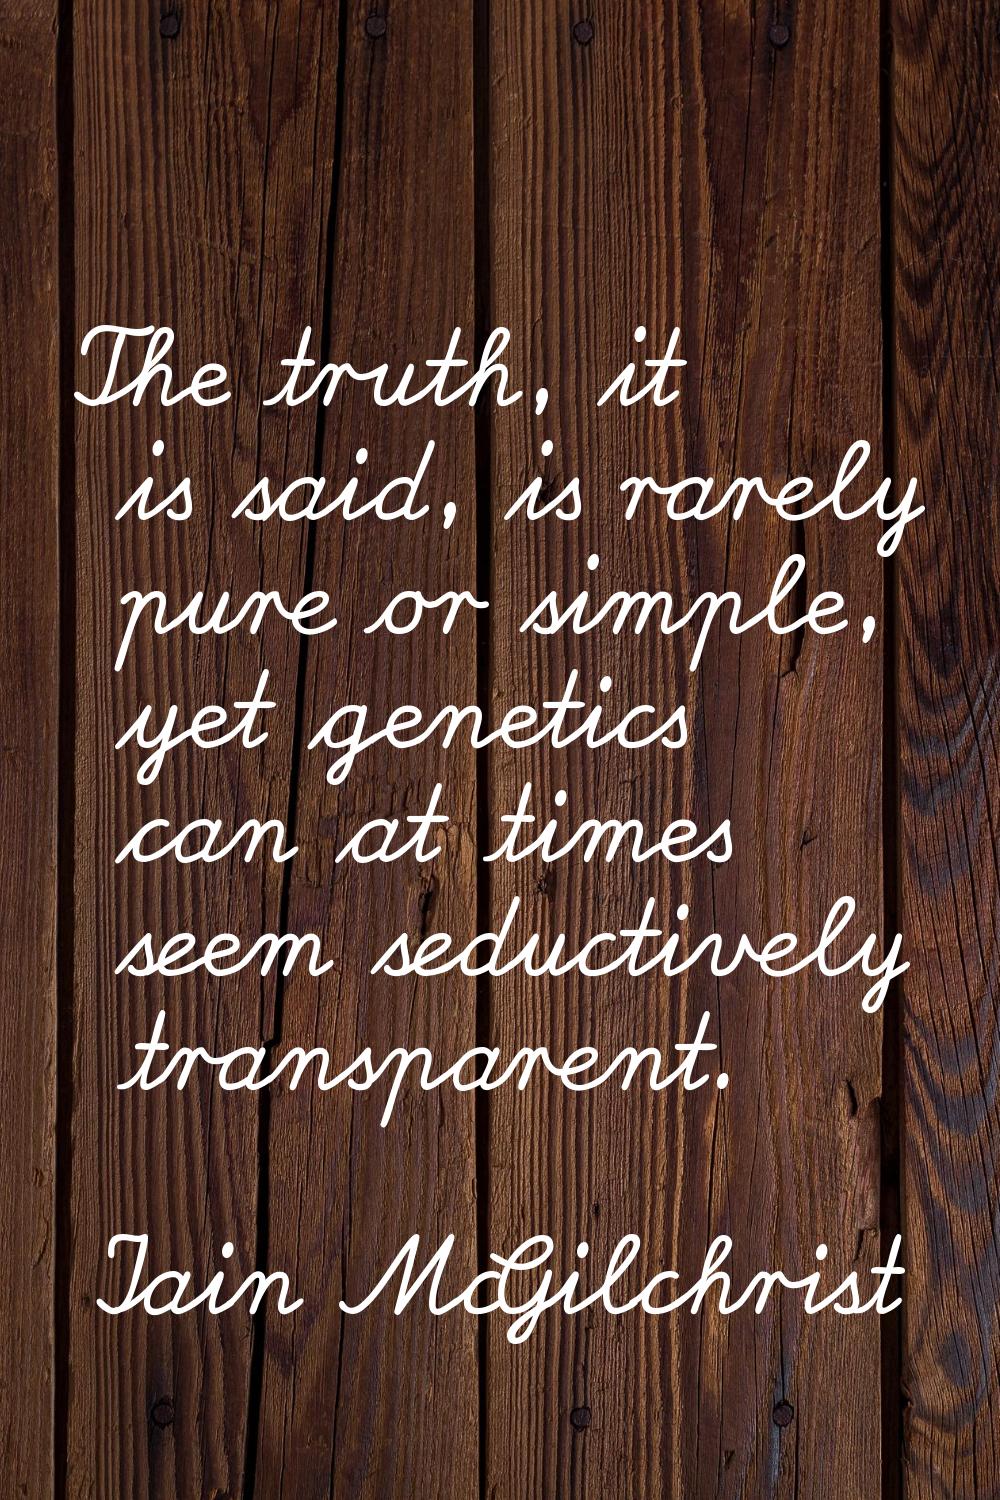 The truth, it is said, is rarely pure or simple, yet genetics can at times seem seductively transpa